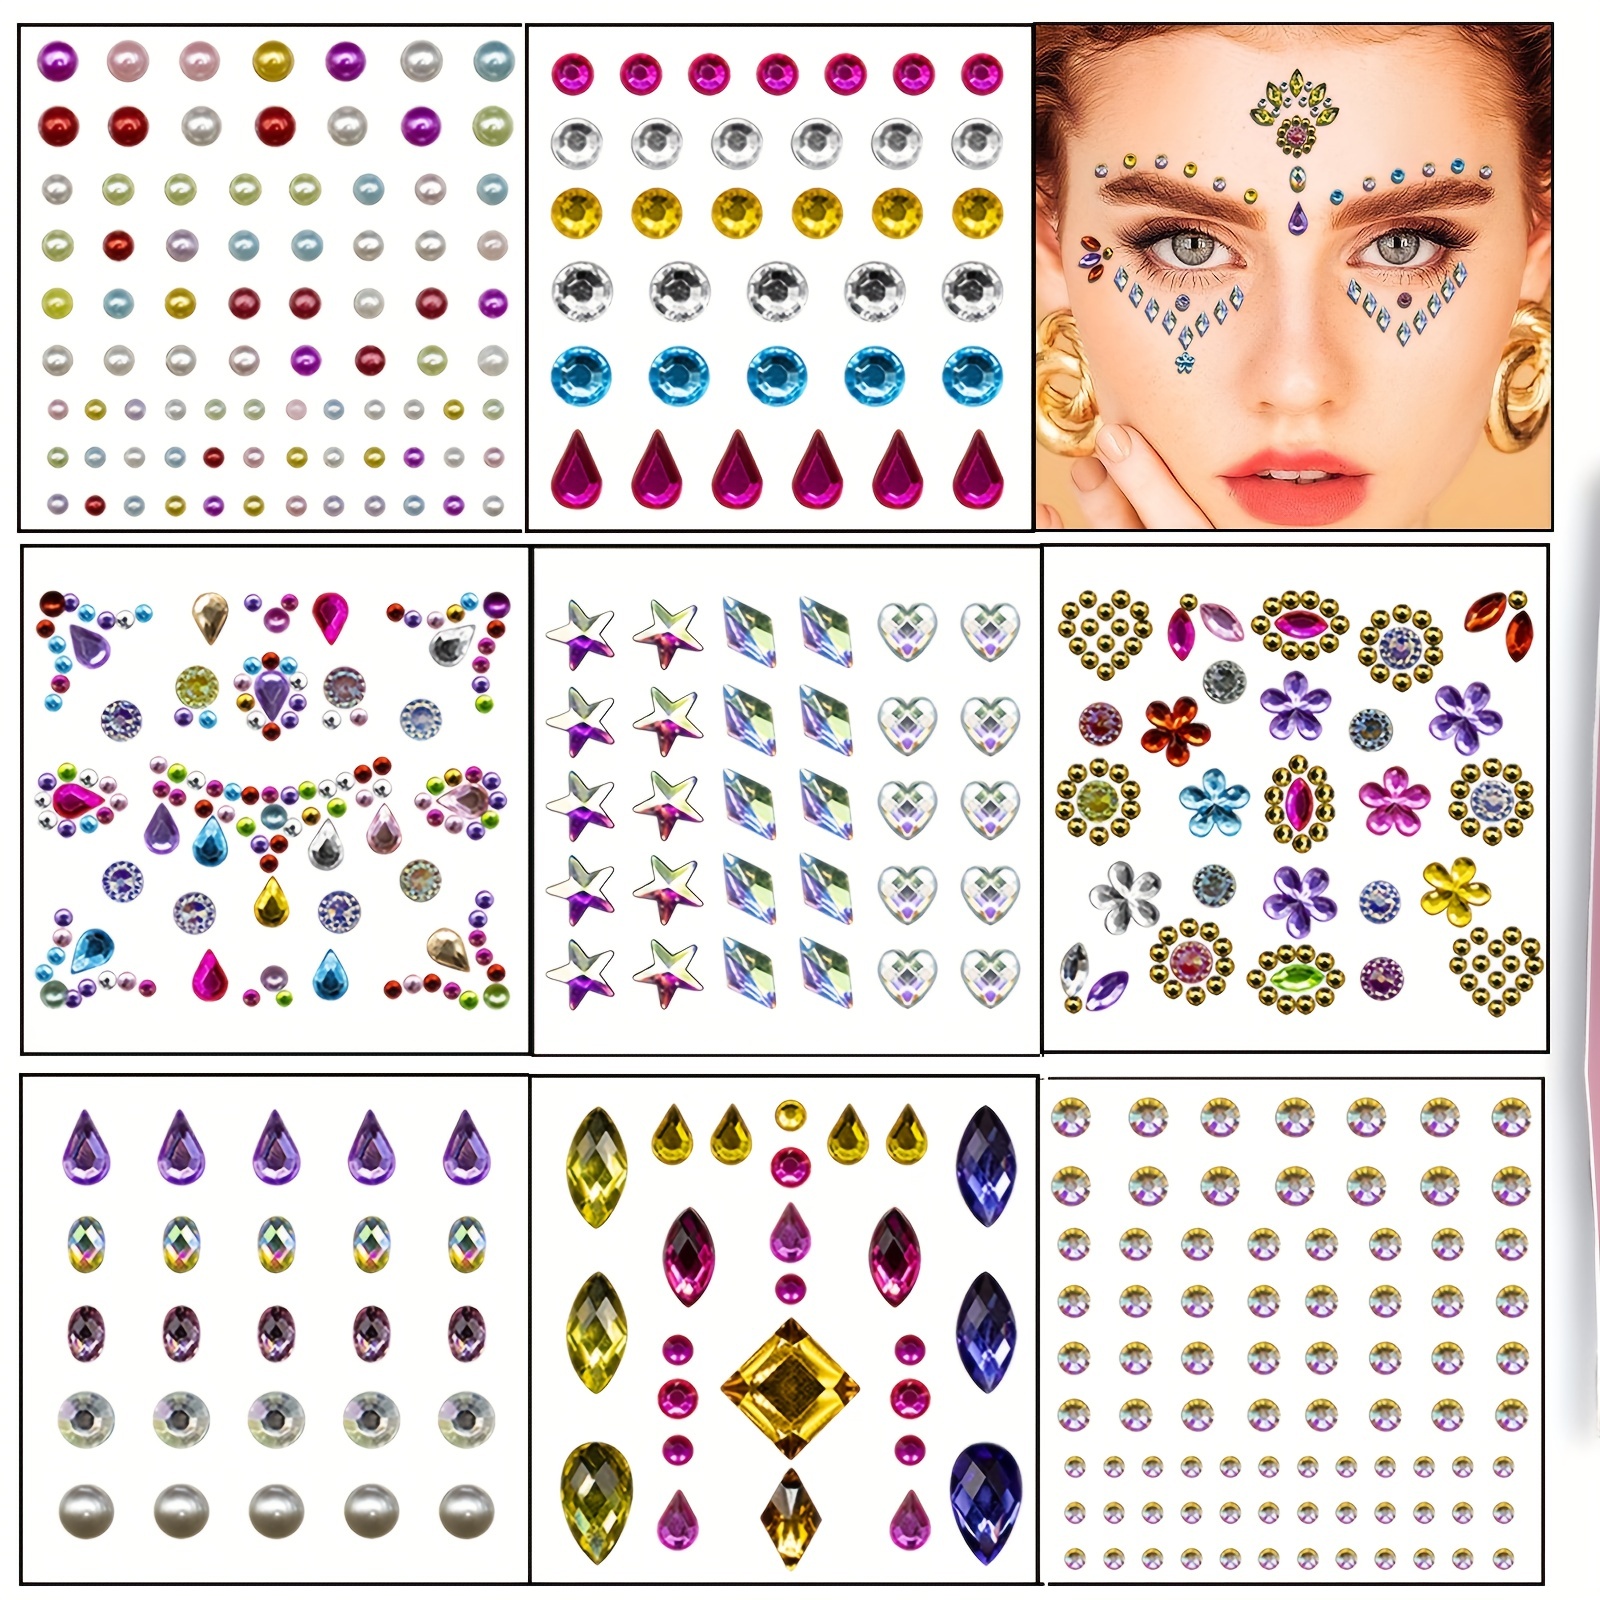 Eye Body Face Rhinestone Jewels Stickers Self Adhesive Crystal Rainbow  Makeup Face Stick for Women Fake Dermal Top Body Jewelry